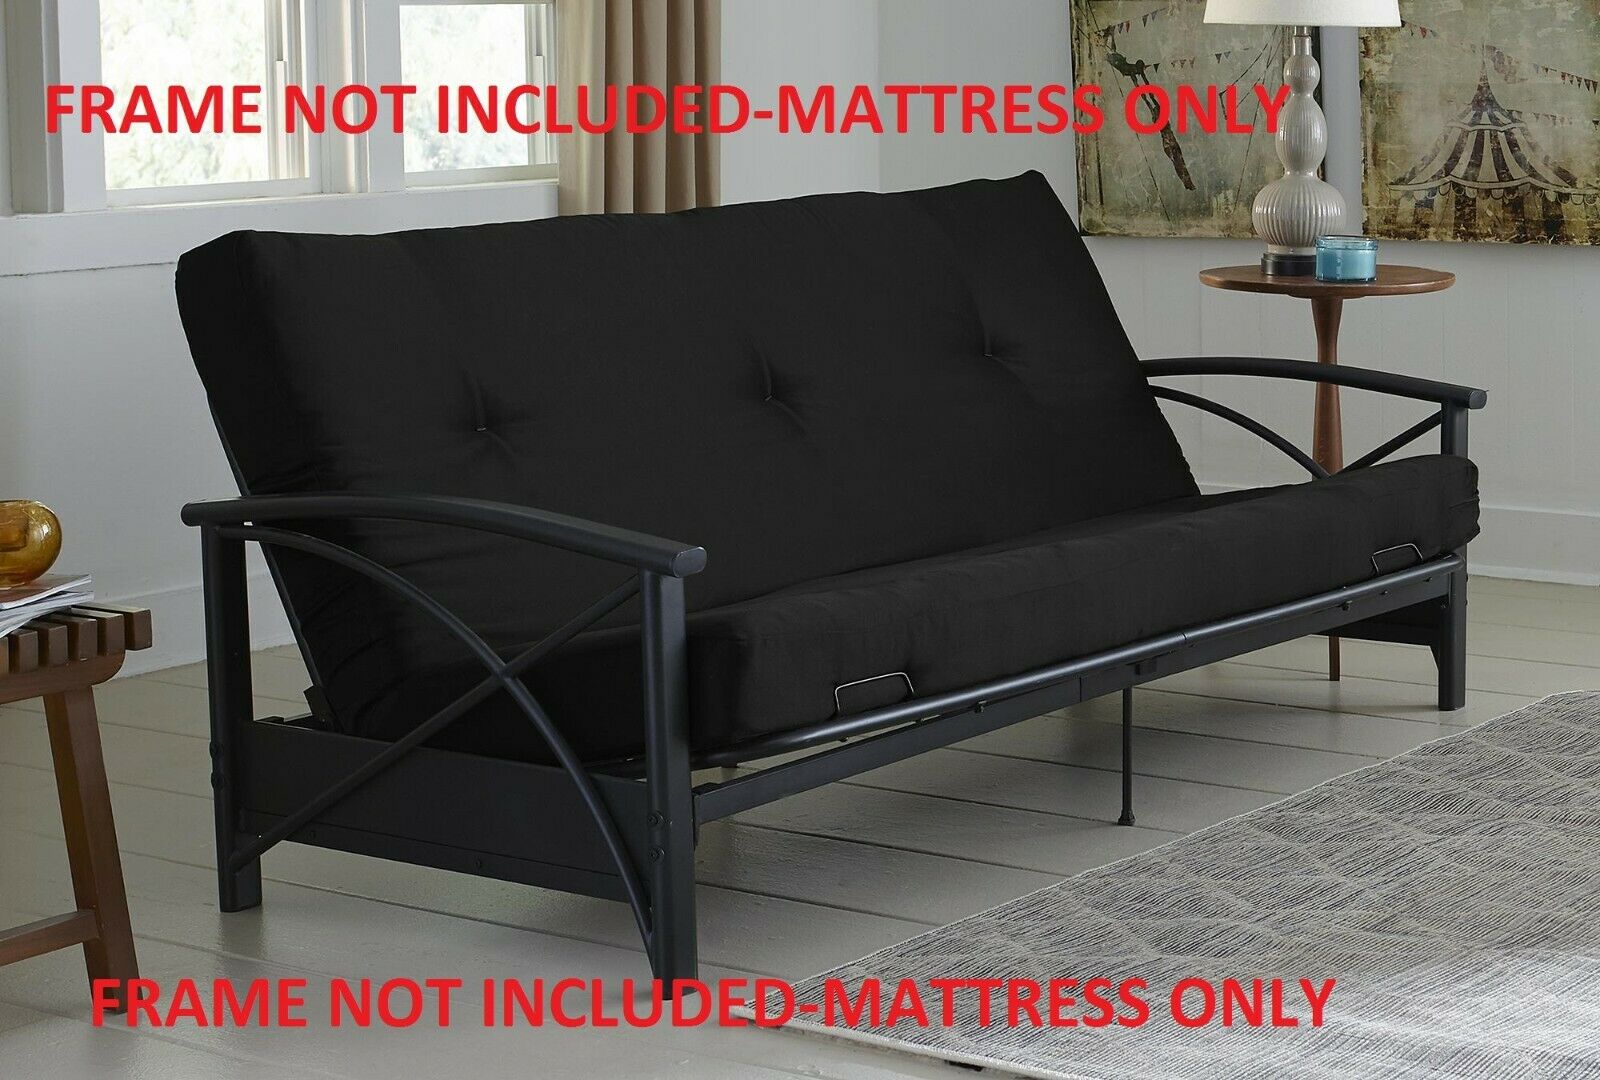 Futon Mattress Guest Spare Room Sofa Bed Full Size Couch Comfortable